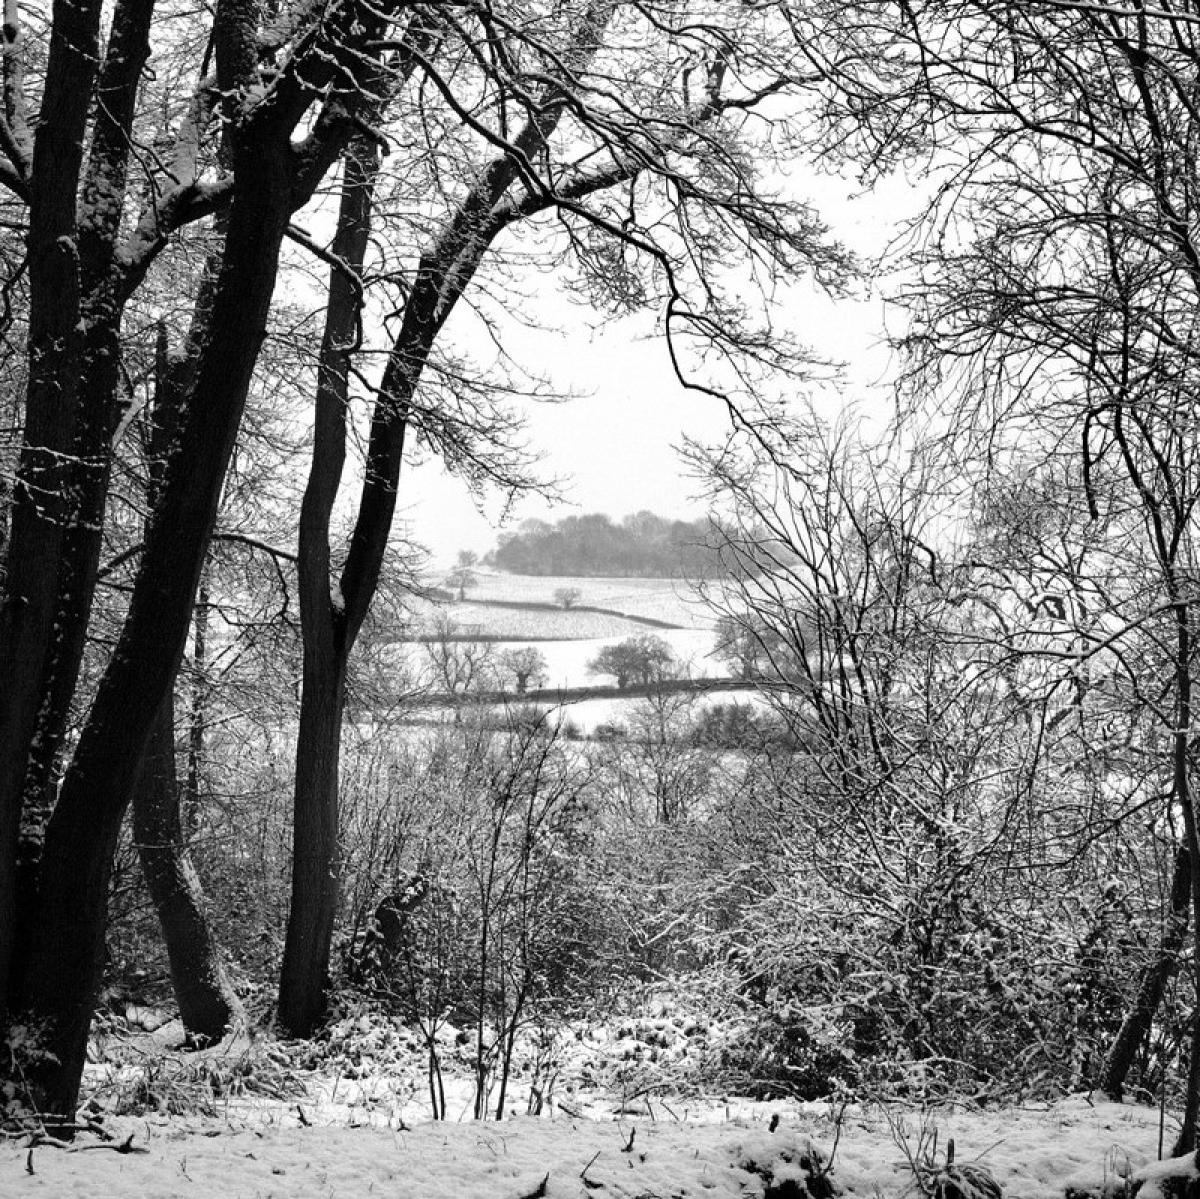 A view through trees to the fields and trees beyond on a snowy day